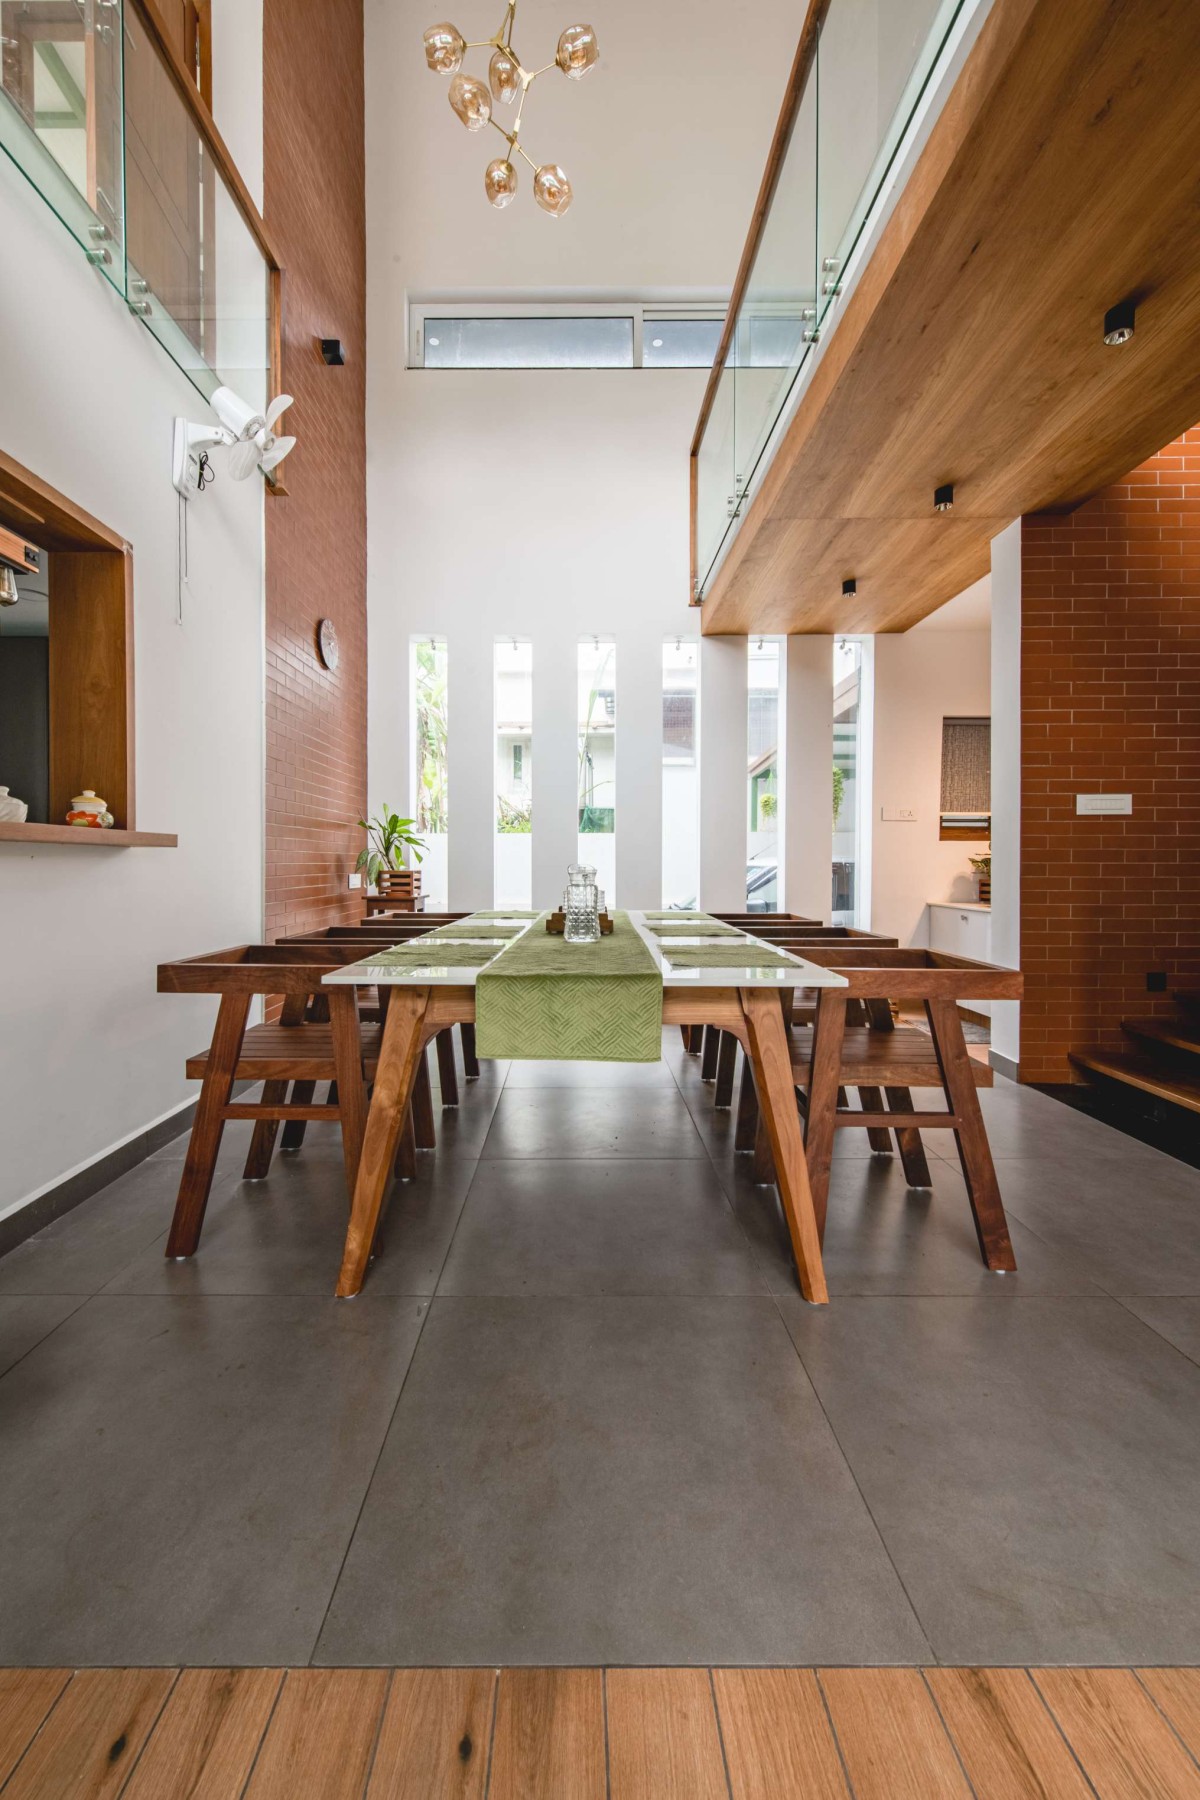 Dining of Courtyard House by Designature Architects